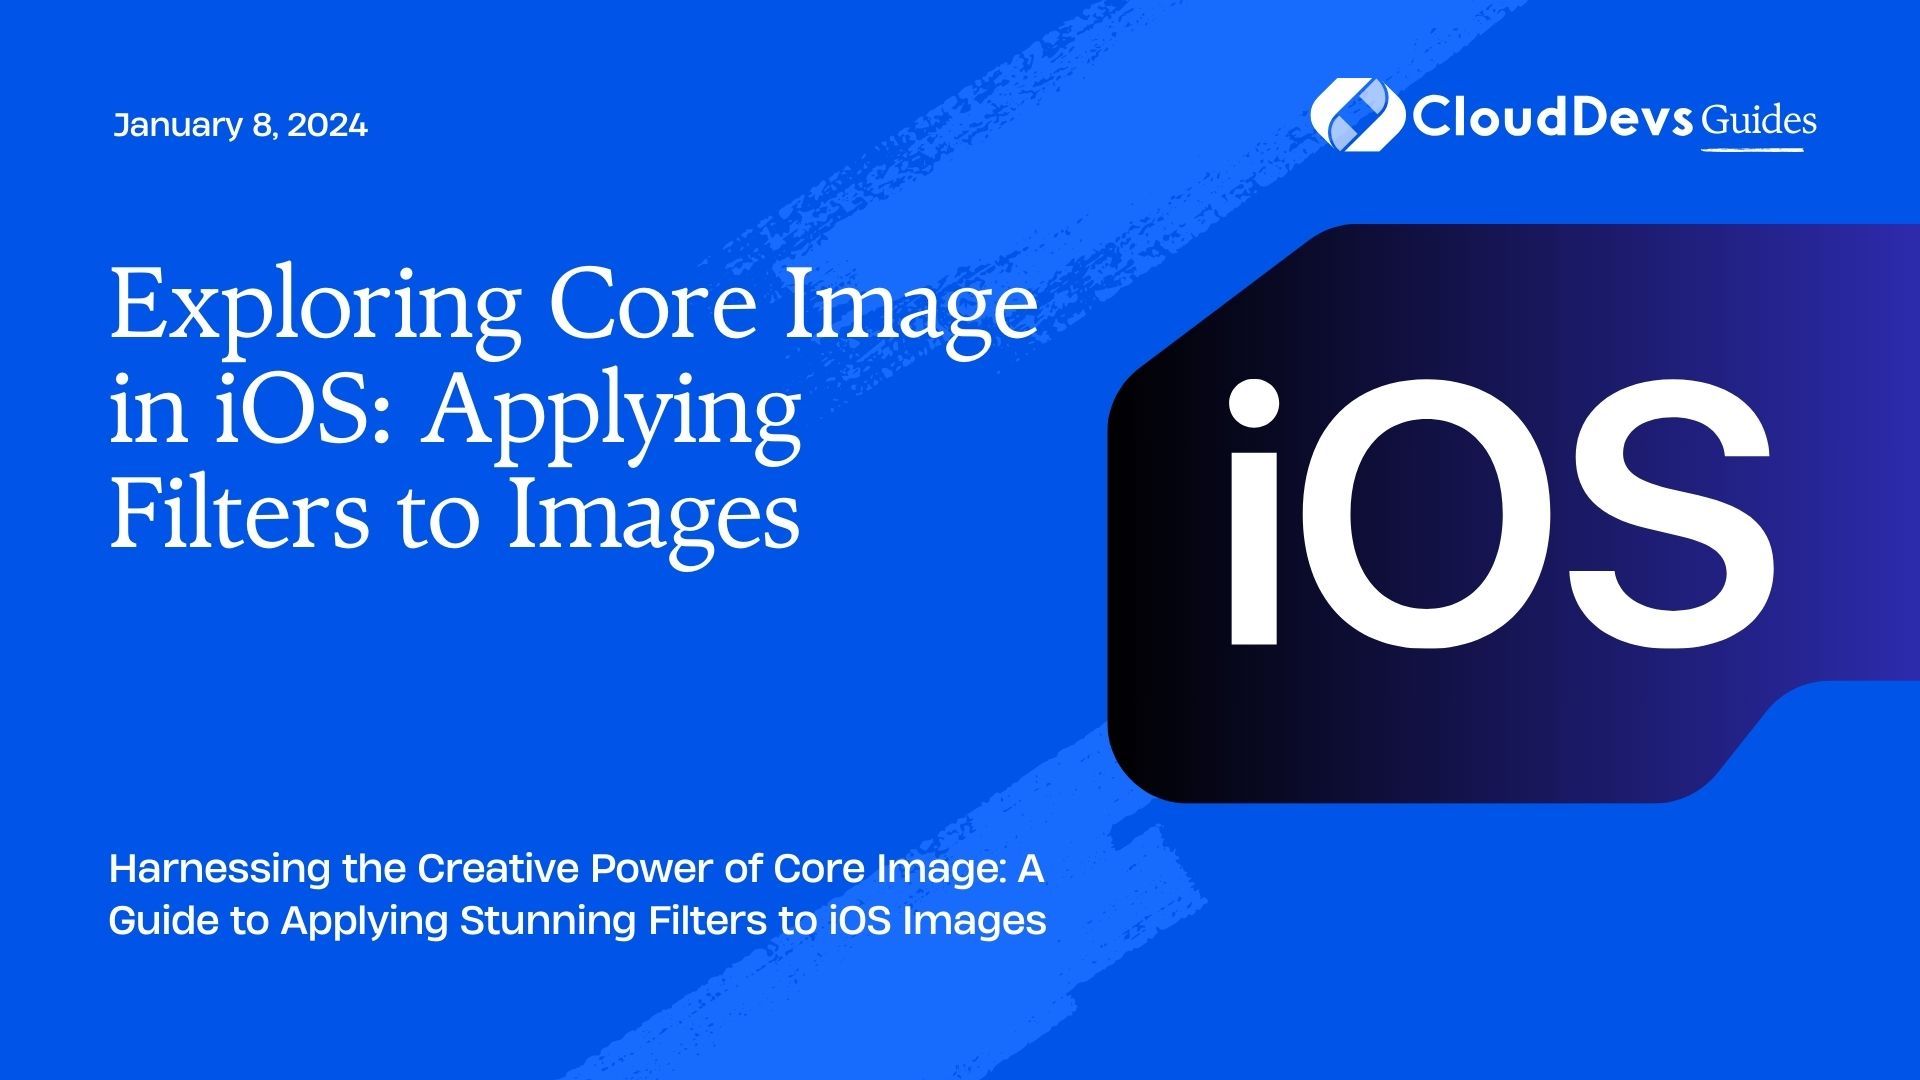 Exploring Core Image in iOS: Applying Filters to Images